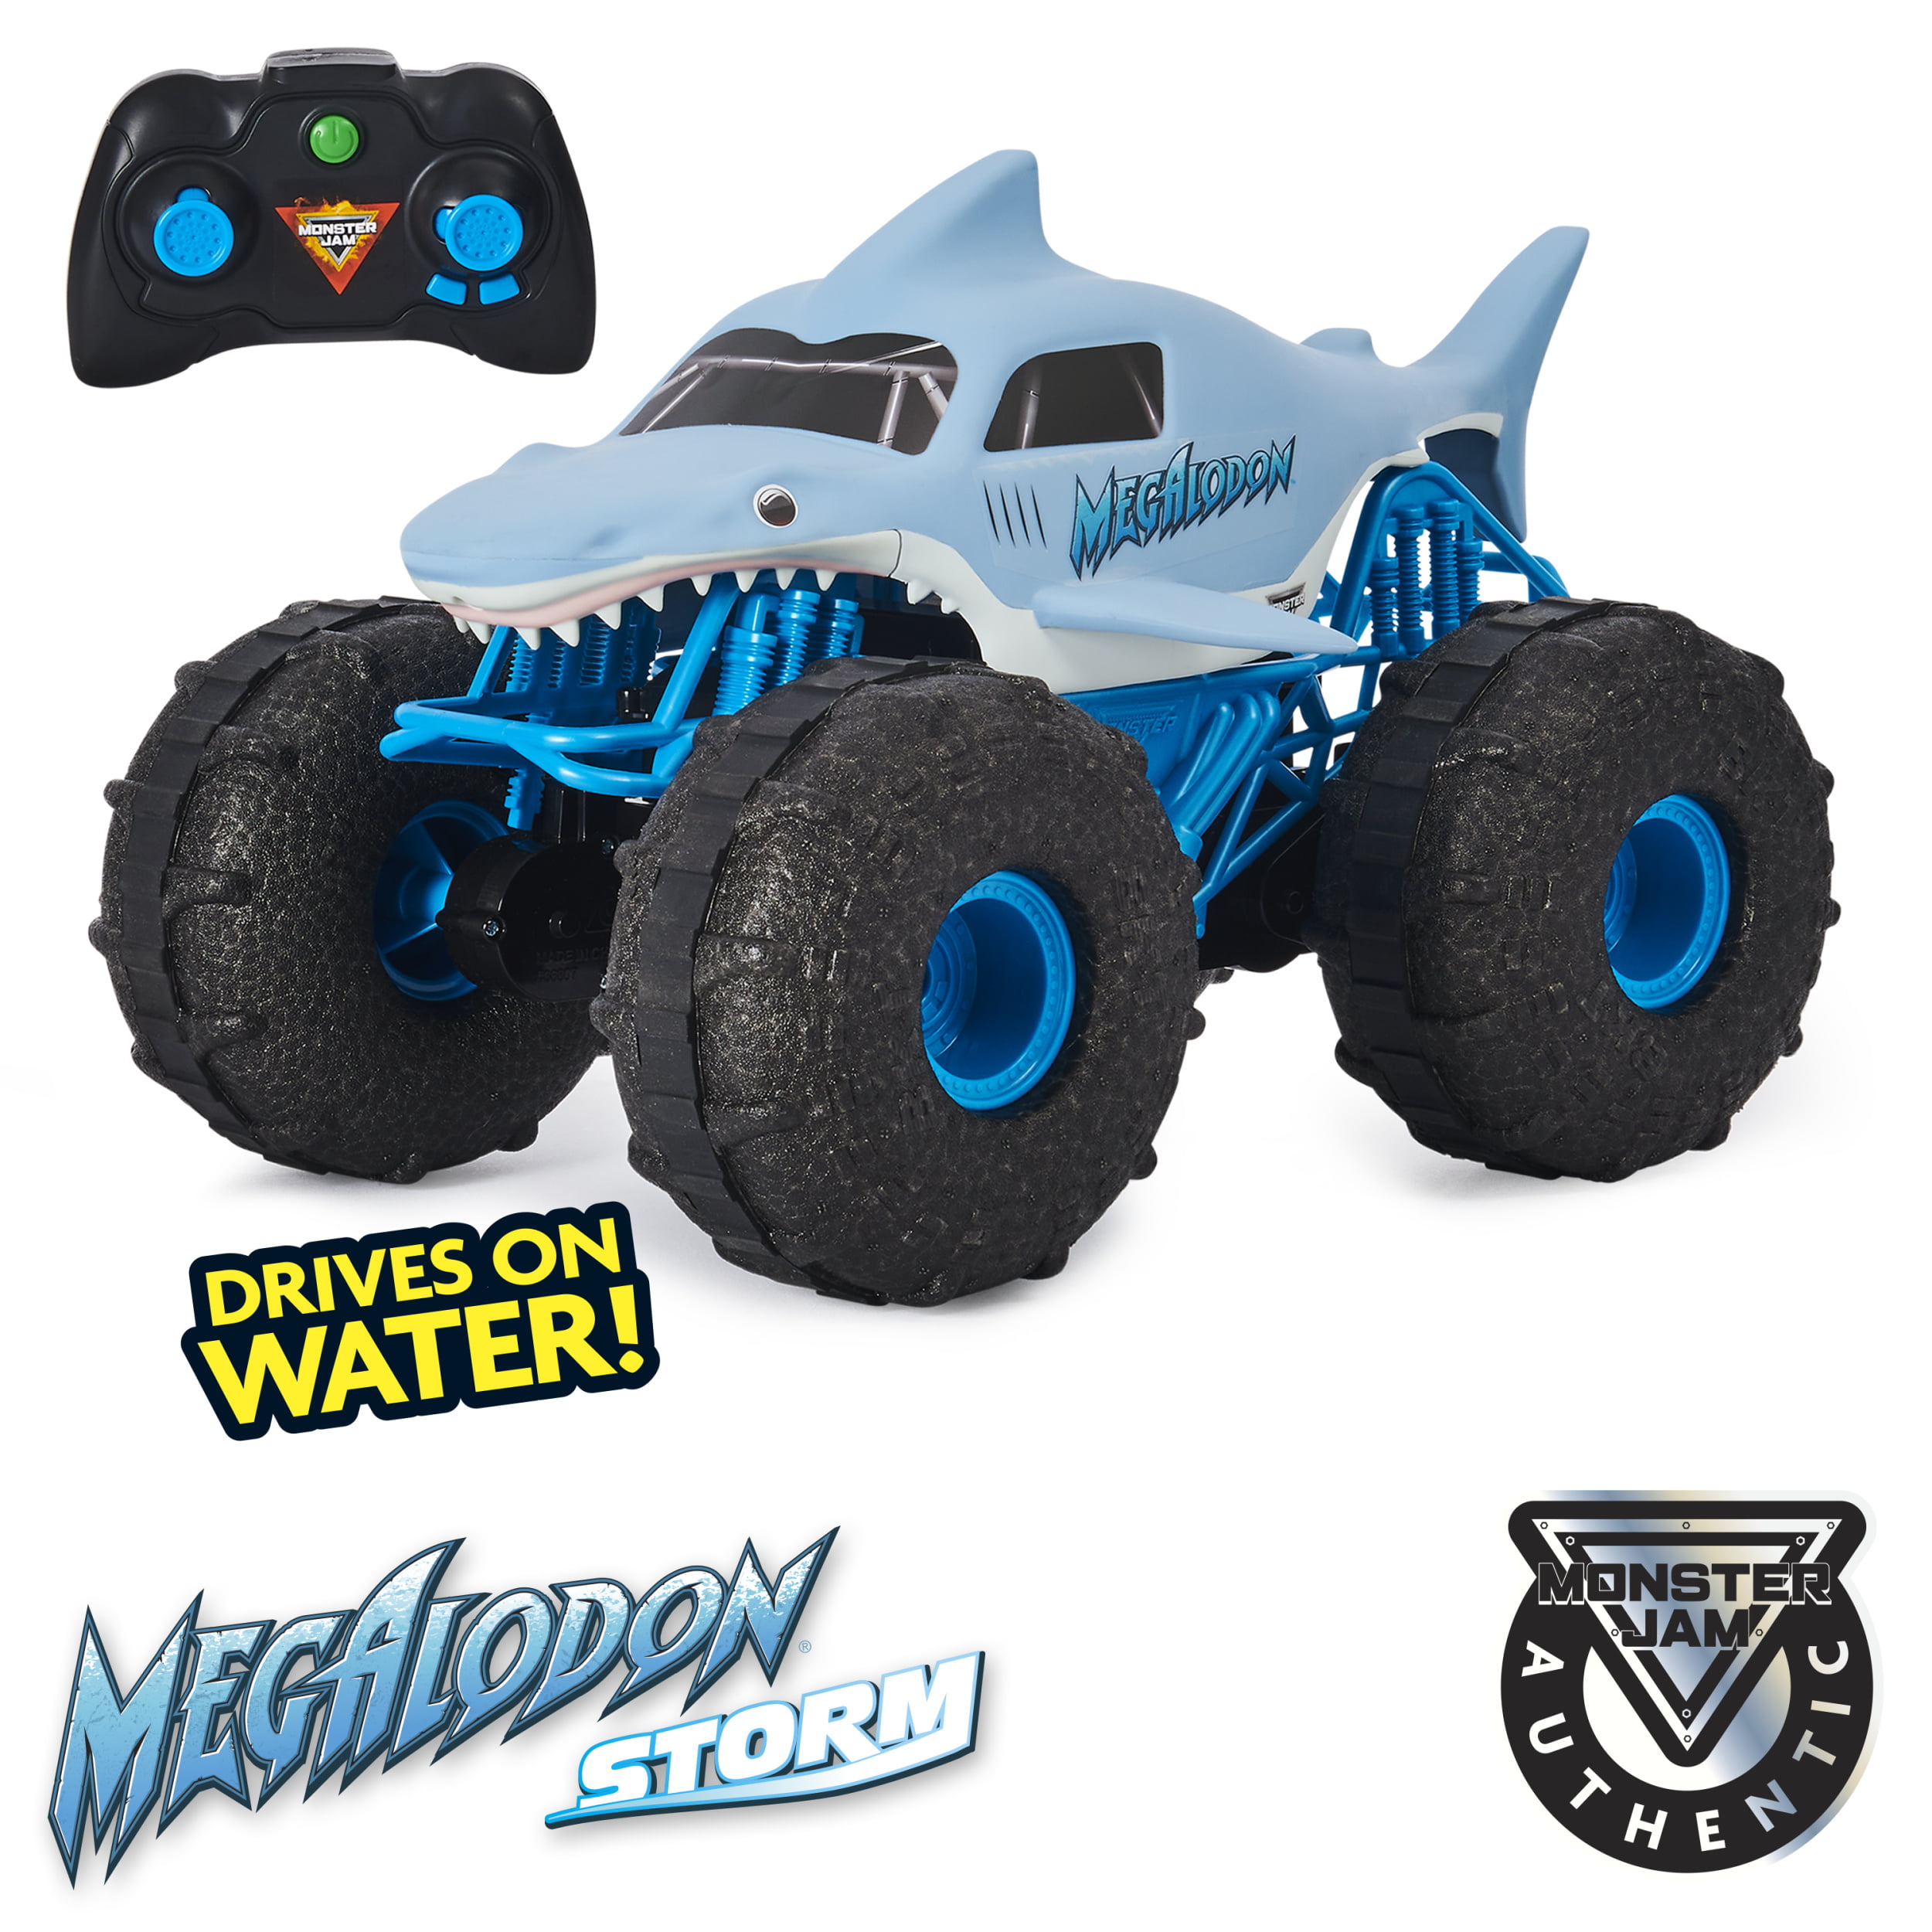 Photo 1 of ***scratches on tires** Monster Jam Official Megalodon Storm All-Terrain Remote Control Monster Truck - 1:15 Scale